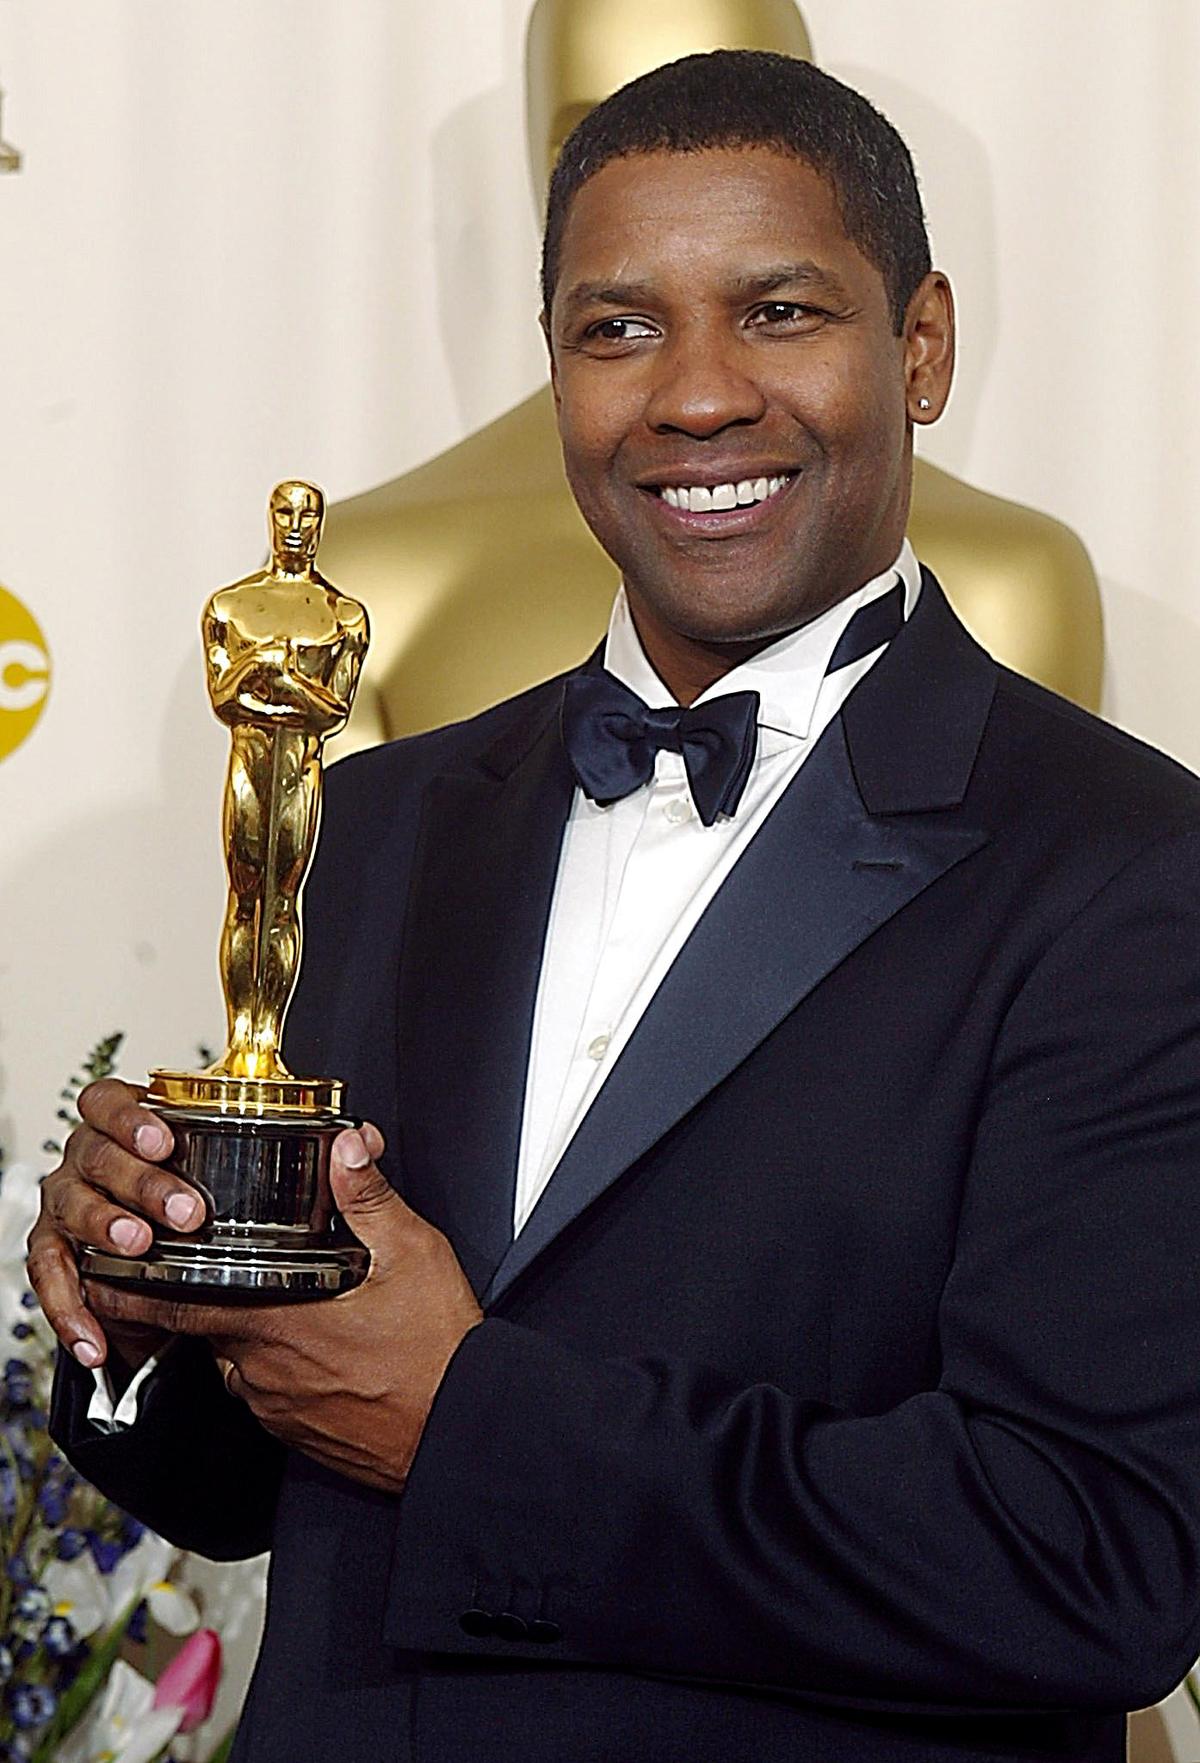 Washington holds his Oscar after winning the award for "Best Actor in a Leading Role" for "Training Day" at the 74th Academy Awards on March 24, 2002. (©Getty Images | <a href="https://www.gettyimages.com/detail/news-photo/actor-denzel-washington-holds-the-oscar-after-winning-the-news-photo/51703989?adppopup=true">MIKE NELSON</a>)